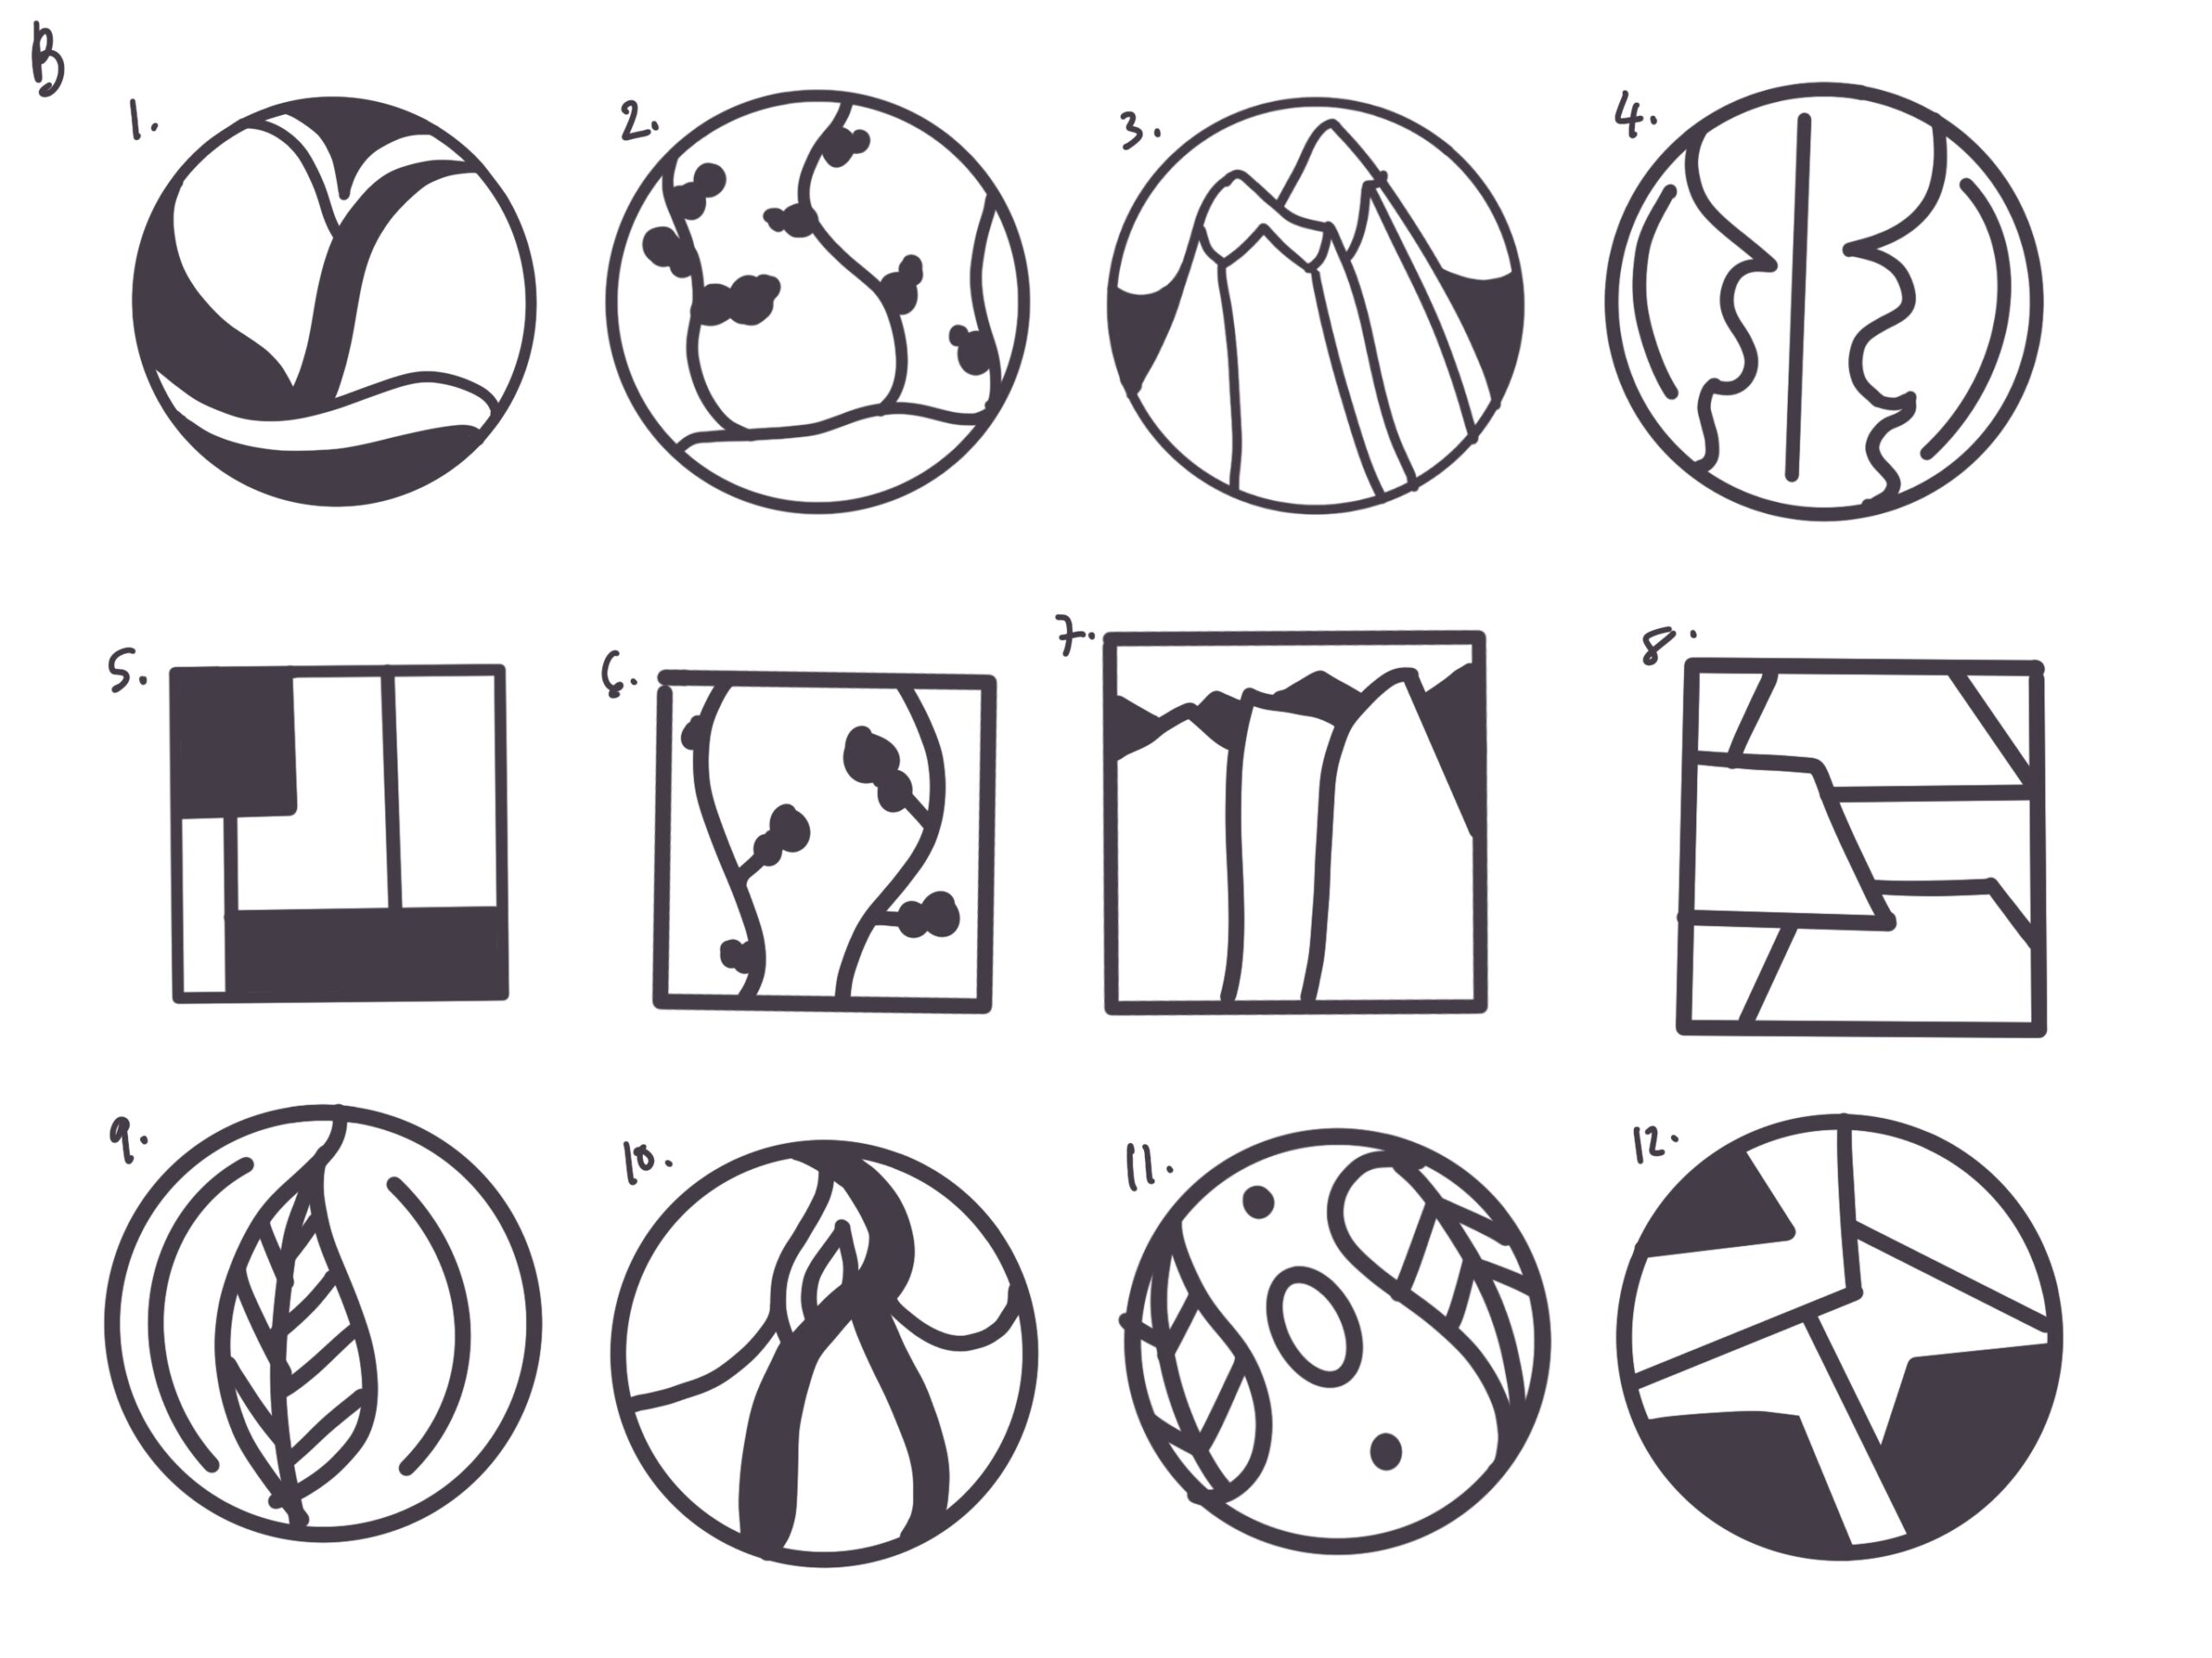 Harbour Roughs, early iterations in black and white. The logo sketches are contained within shapes, either squares or circles. All contain various abstract designs, pulled from nature.